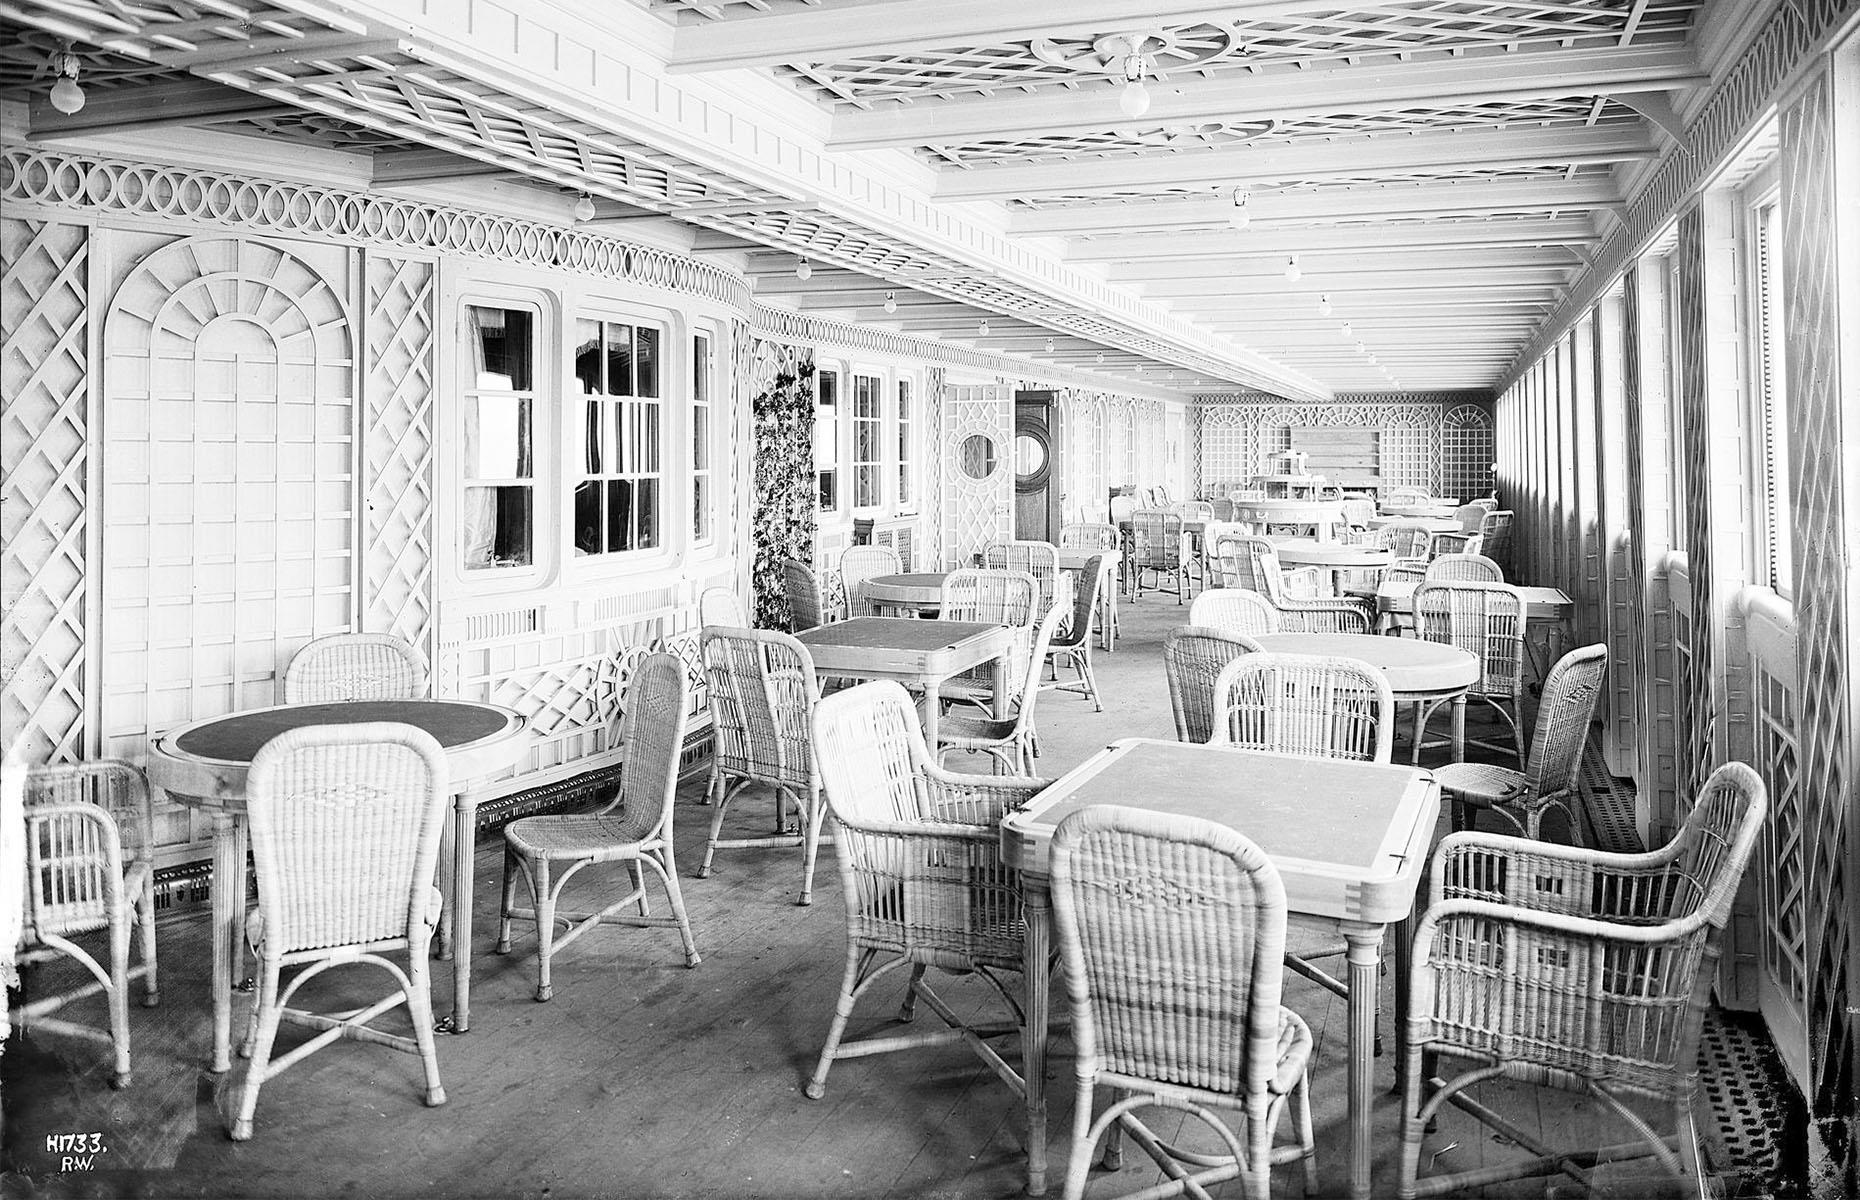 As well as the dining saloon and luxurious à la carte restaurant first-class passengers had other places to eat including the Veranda Café, and the Café Parisien (pictured). Both had wicker chairs and ivy colored trellises, the former resembled an outdoor terrace of a country hotel and the latter a café on a Parisian sidewalk, despite being completely enclosed.